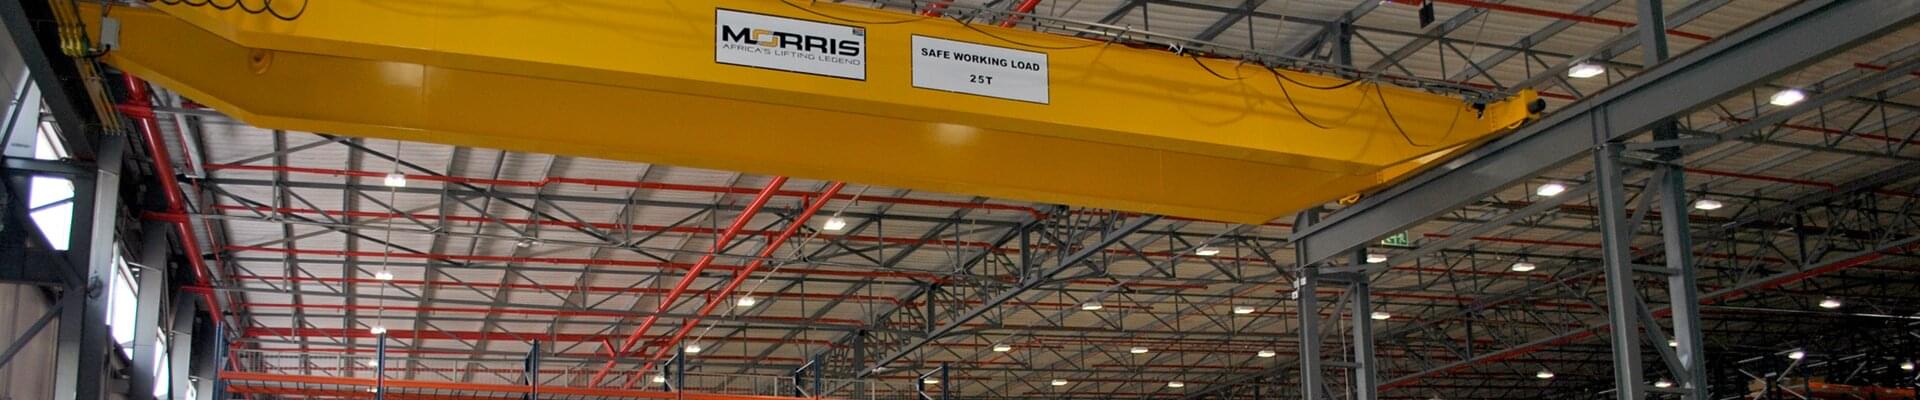 ABUS cranes in new goods distribution center in South Africa